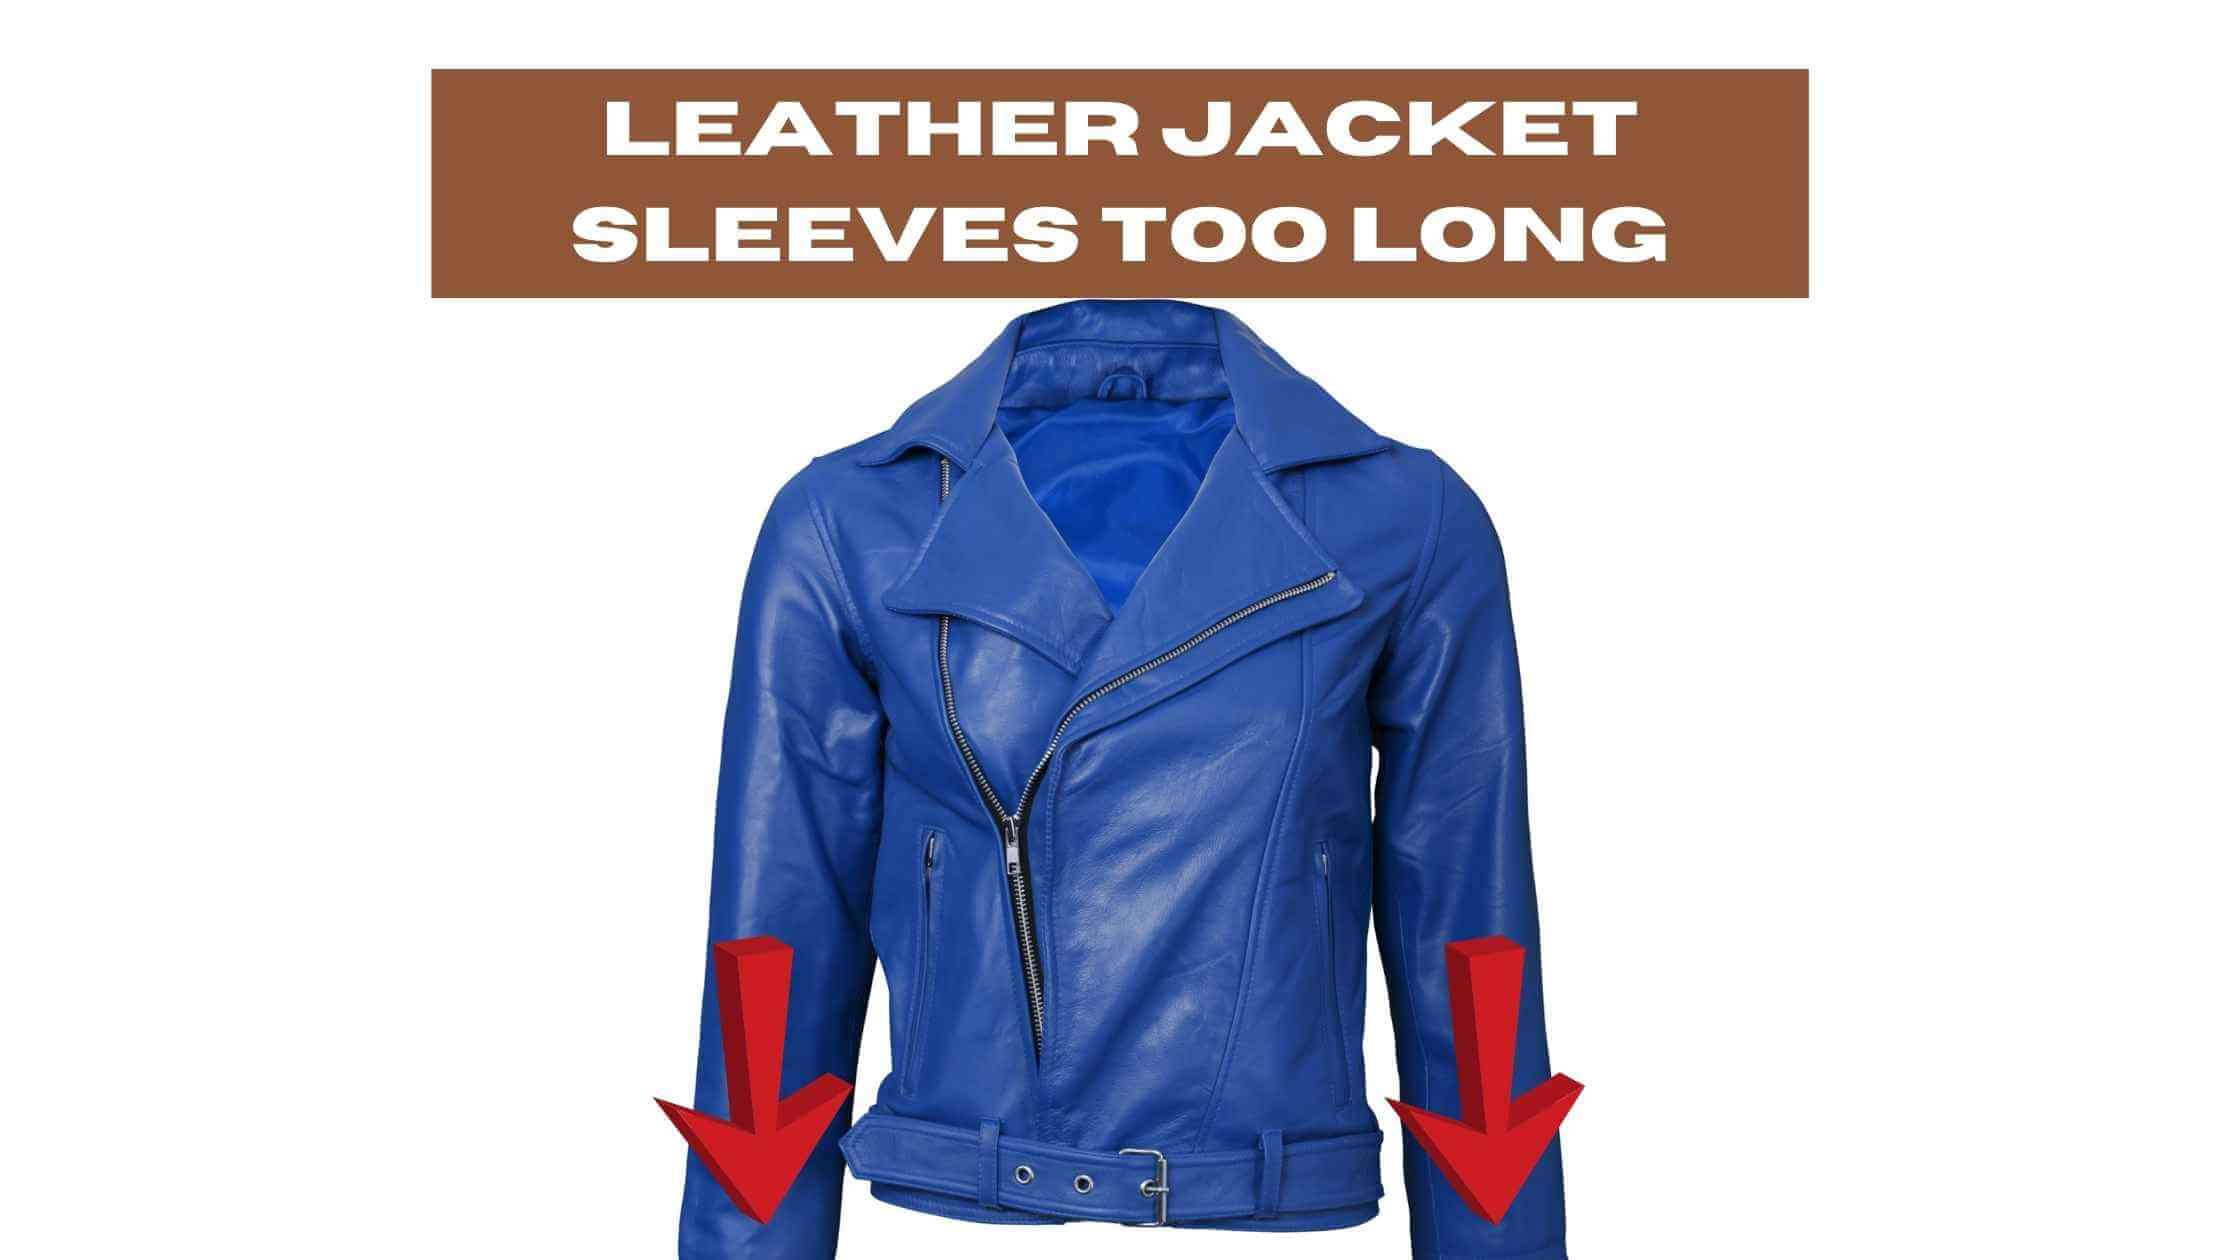 Are Your Leather Jacket Sleeves Too Long